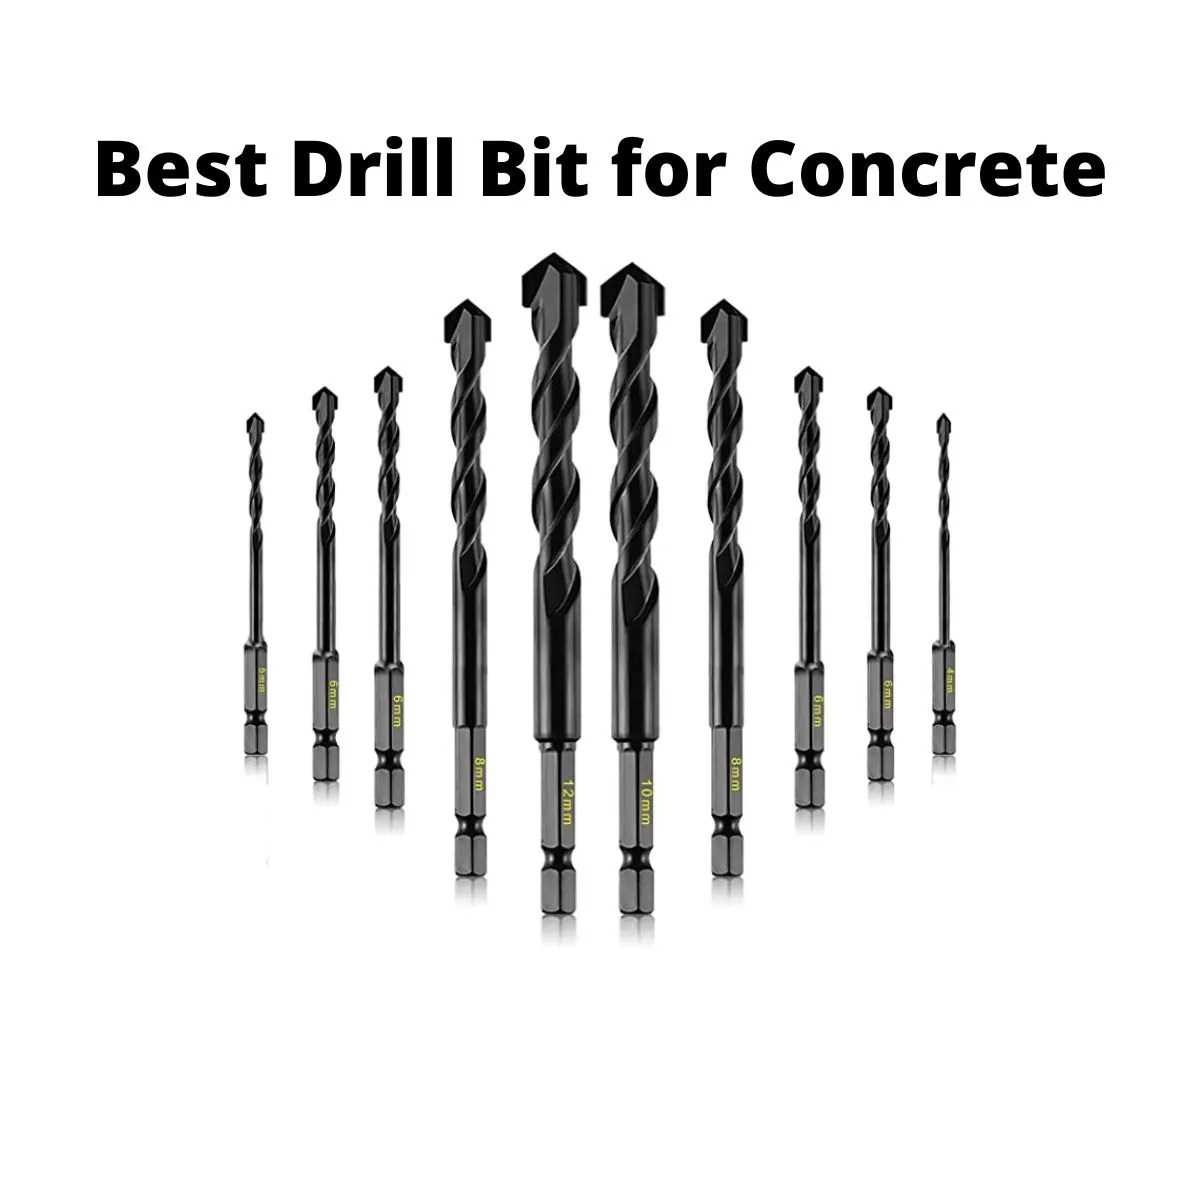 Choosing the Right Size Drill Bit for Concrete